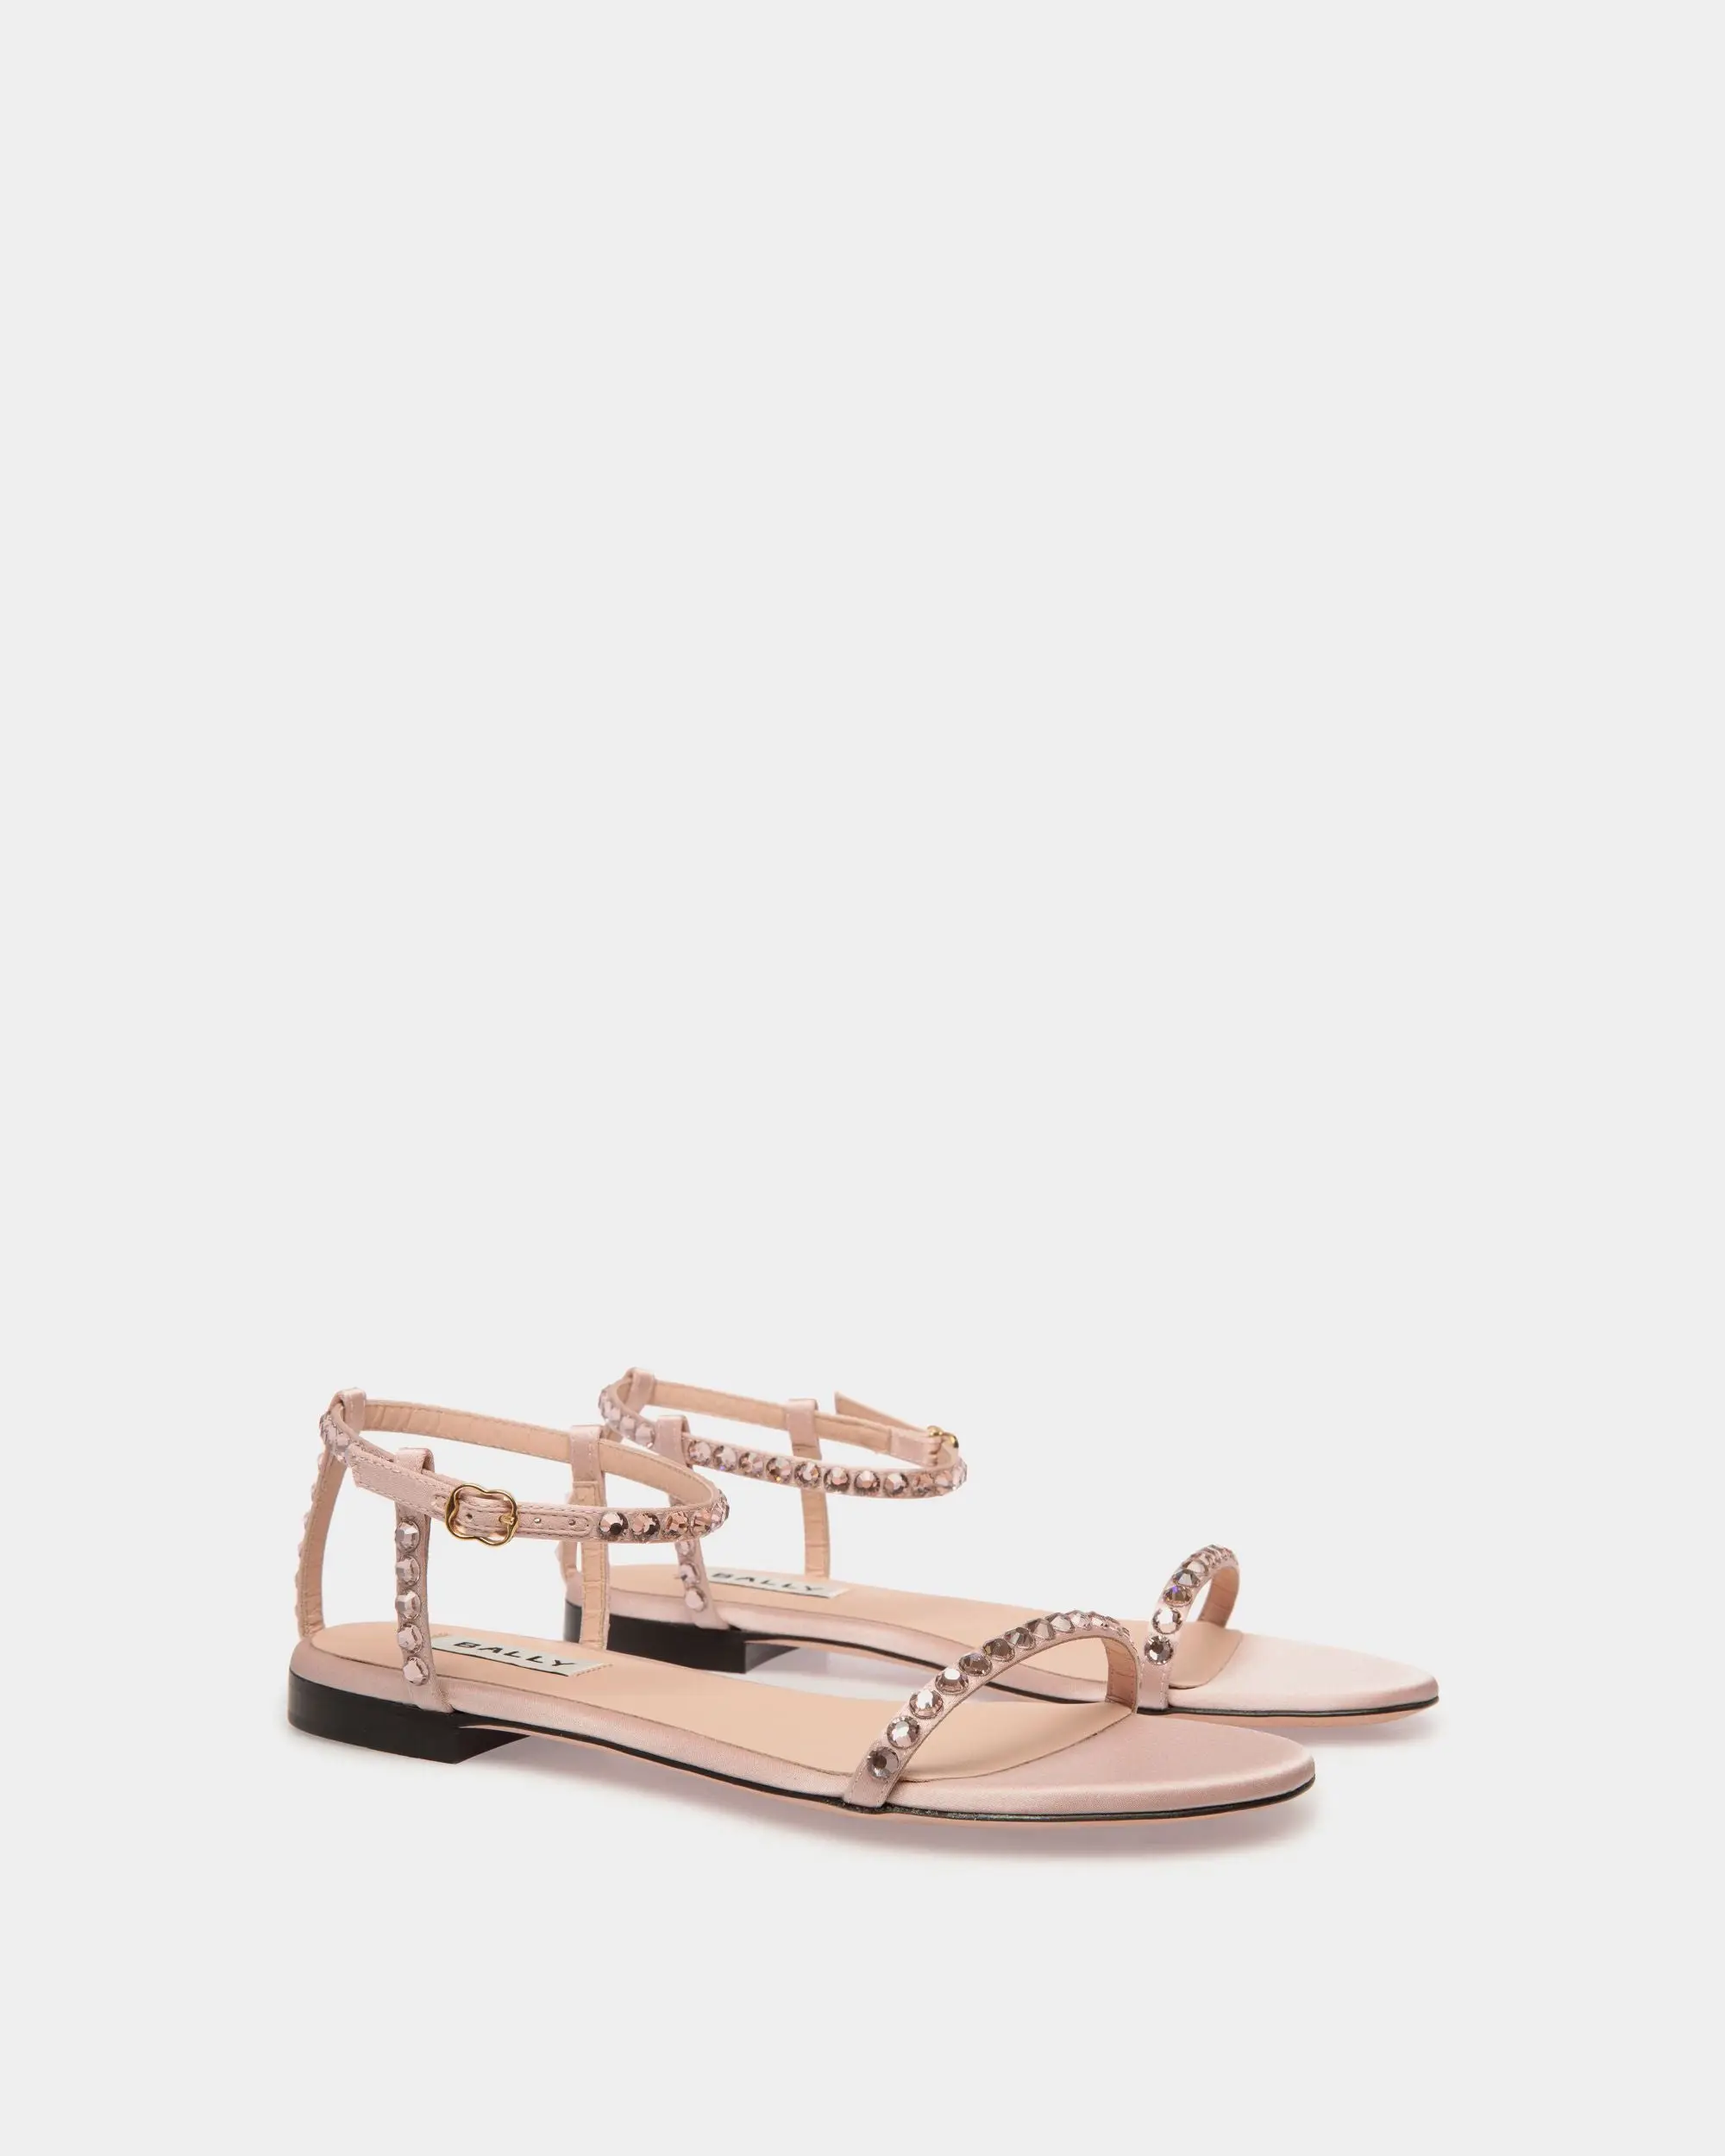 Katy Flat Sandal in Light Pink Fabric with Crystals